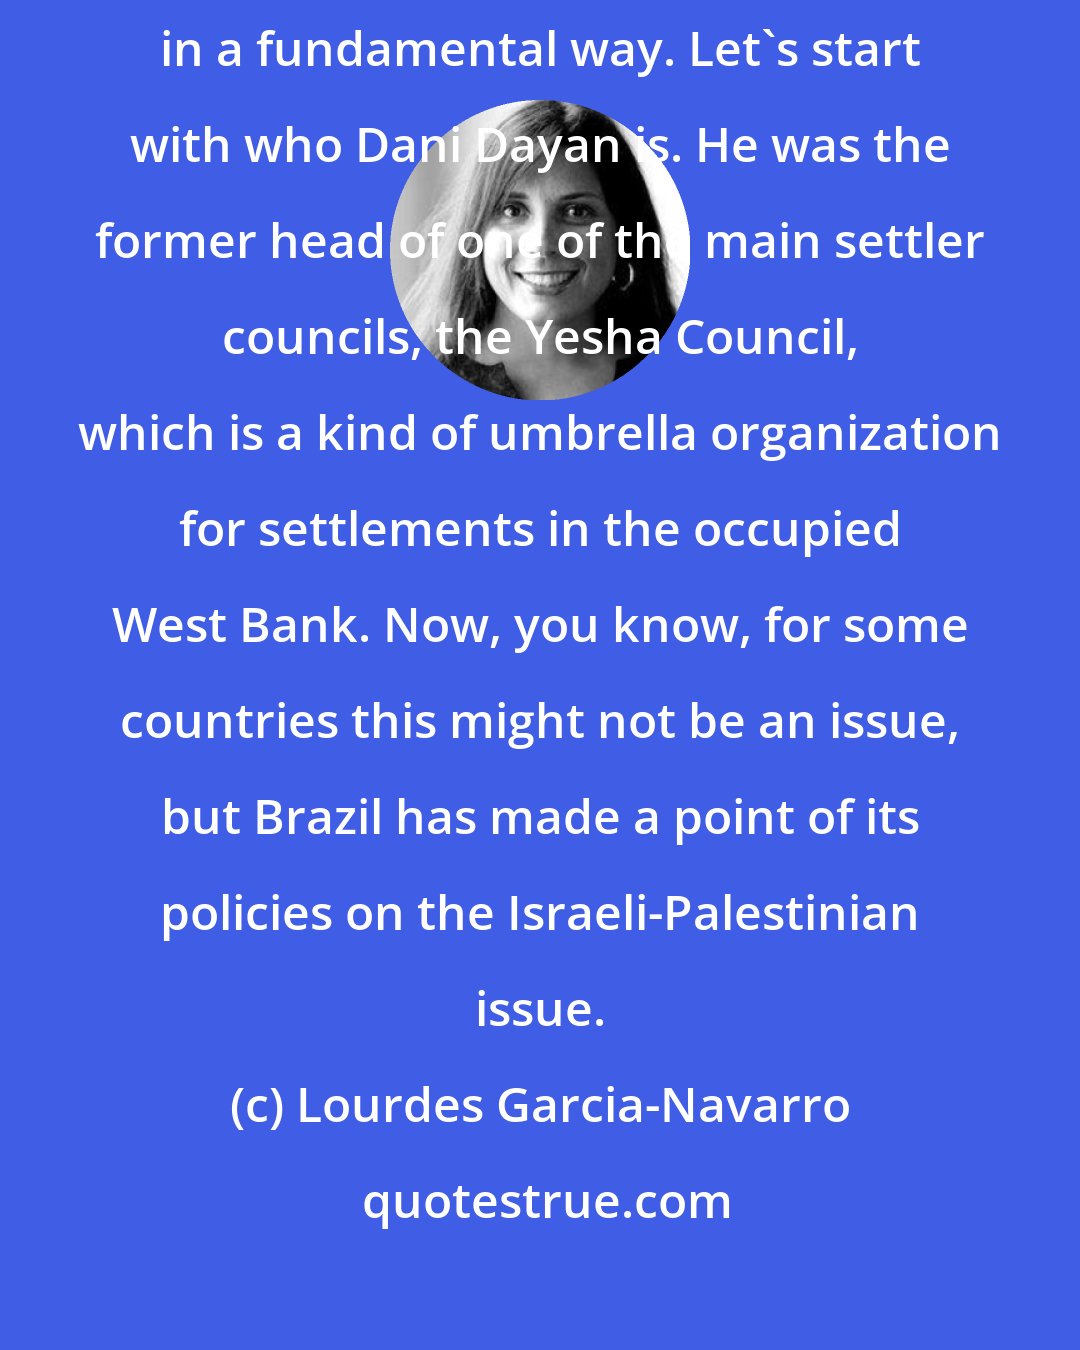 Lourdes Garcia-Navarro: He is someone who is involved in the Israeli-Palestinian conflict in a fundamental way. Let's start with who Dani Dayan is. He was the former head of one of the main settler councils, the Yesha Council, which is a kind of umbrella organization for settlements in the occupied West Bank. Now, you know, for some countries this might not be an issue, but Brazil has made a point of its policies on the Israeli-Palestinian issue.